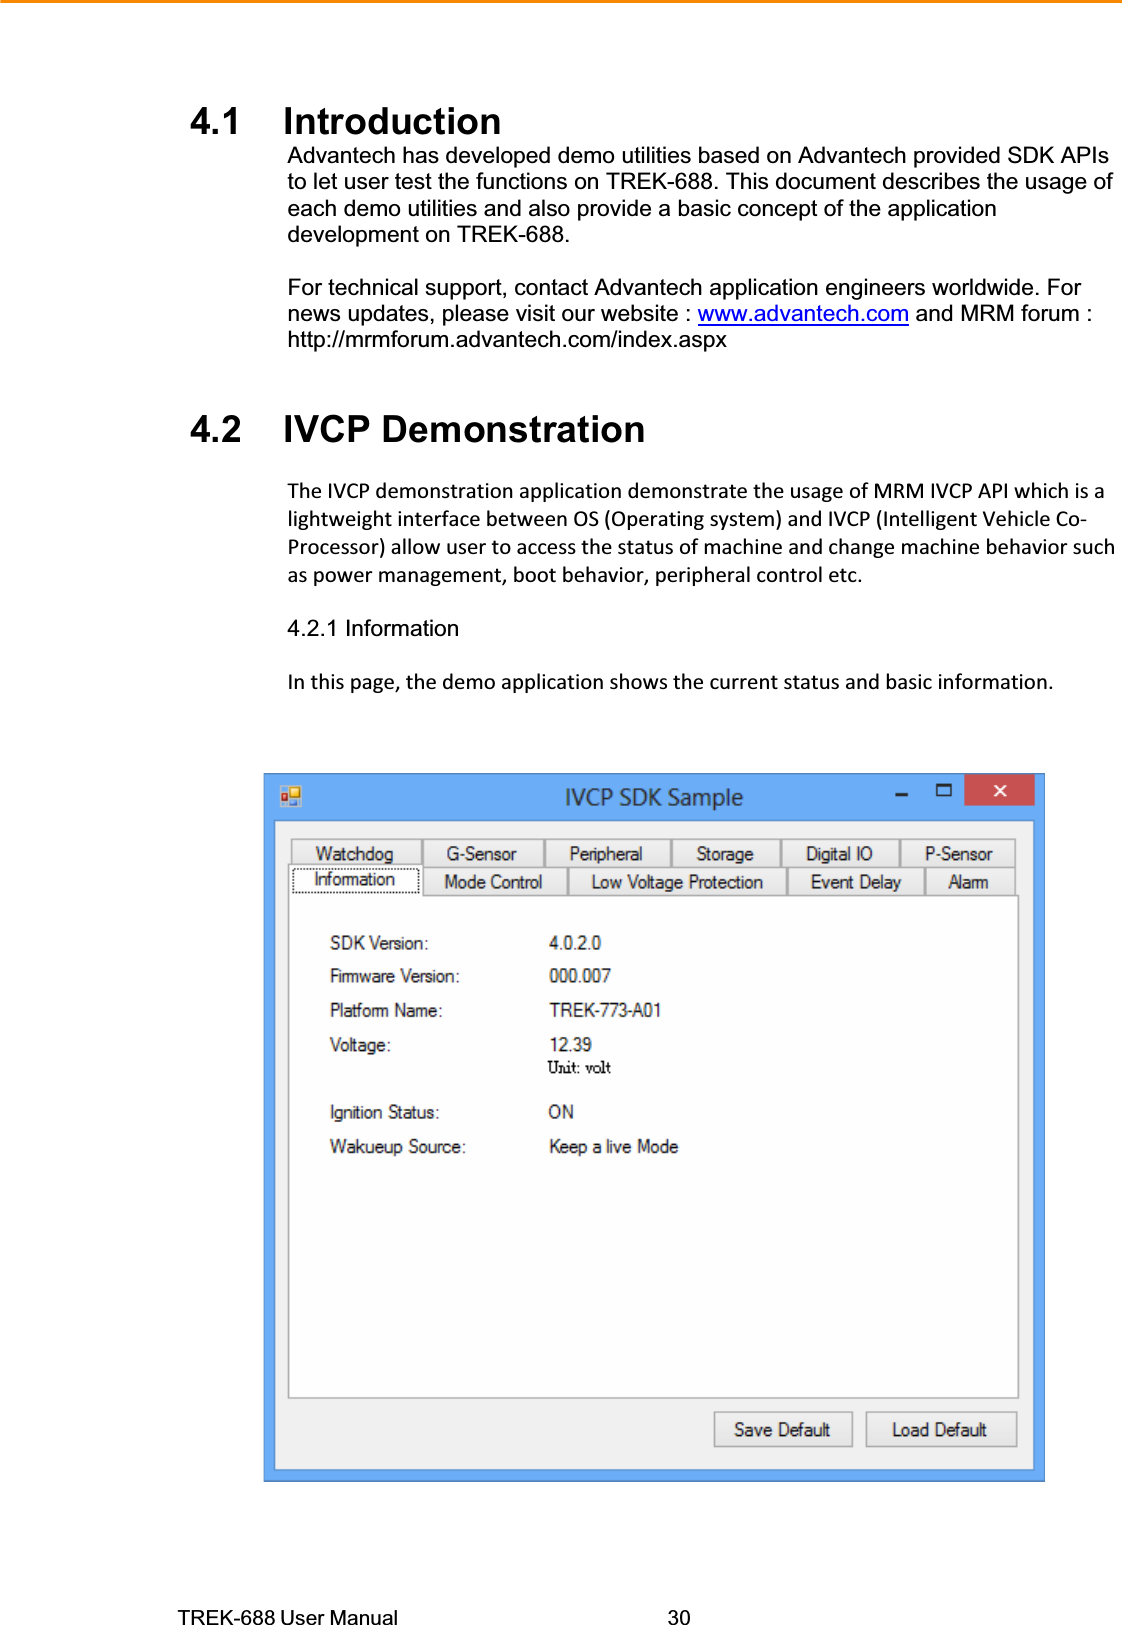 TREK-688 User Manual  304.1    Introduction Advantech has developed demo utilities based on Advantech provided SDK APIs to let user test the functions on TREK-688. This document describes the usage of each demo utilities and also provide a basic concept of the application development on TREK-688.  For technical support, contact Advantech application engineers worldwide. For news updates, please visit our website : www.advantech.com and MRM forum :http://mrmforum.advantech.com/index.aspx   4.2    IVCP Demonstration  TheIVCPdemonstrationapplicationdemonstratetheusageofMRMIVCPAPIwhichisalightweightinterfacebetweenOS(Operatingsystem)andIVCP(IntelligentVehicleCoͲProcessor)allowusertoaccessthestatusofmachineandchangemachinebehaviorsuchaspowermanagement,bootbehavior,peripheralcontroletc.  4.2.1 Information  Inthispage,thedemoapplicationshowsthecurrentstatusandbasicinformation.